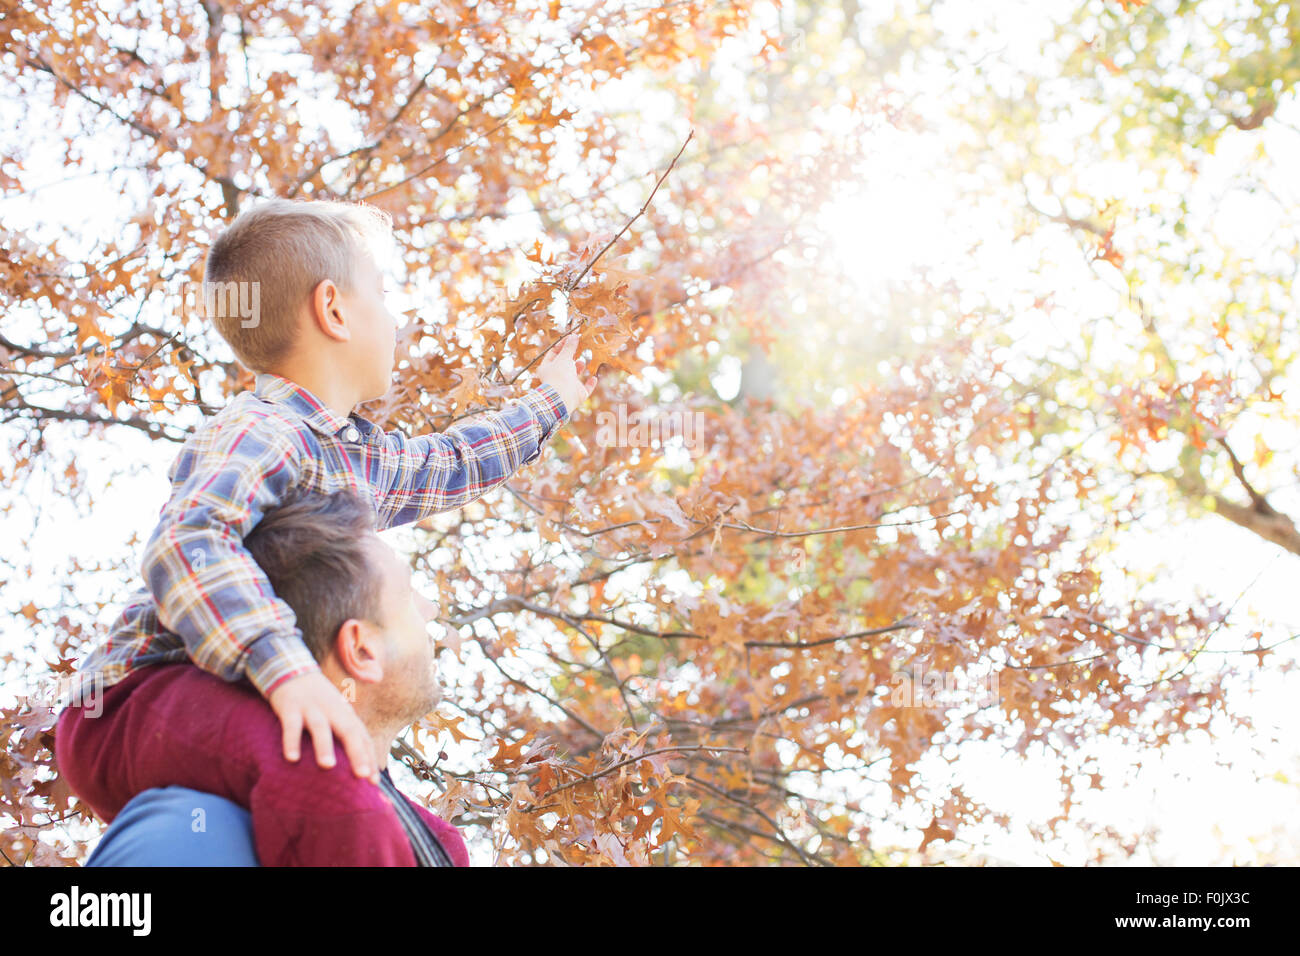 Father carrying son on shoulders reaching for autumn leaves Stock Photo